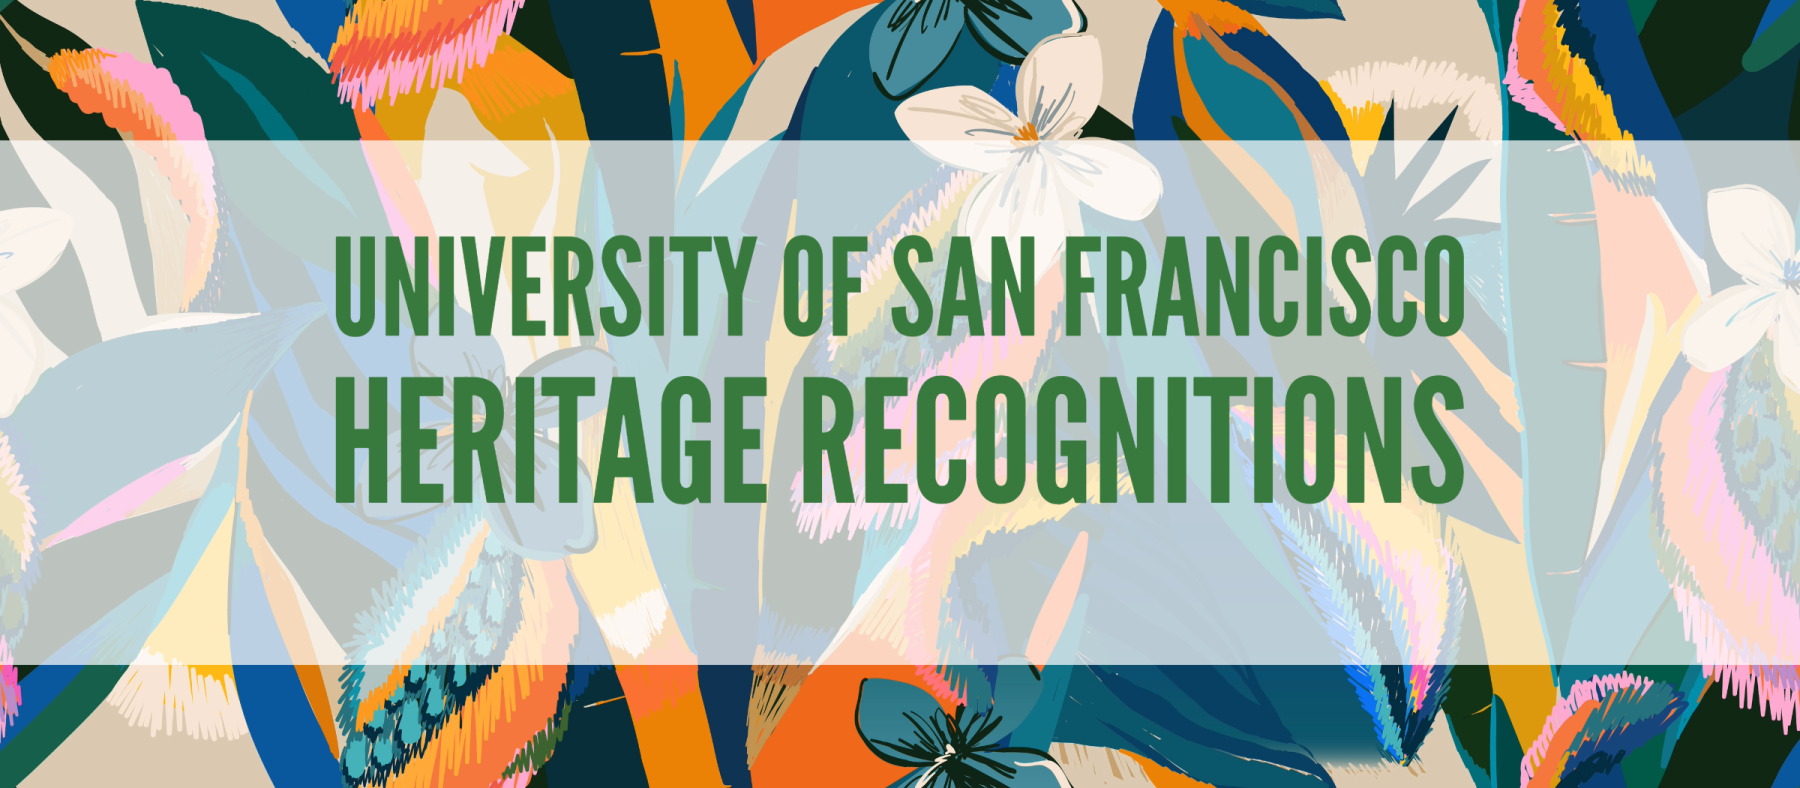 USF Heritage Recognitions in green font on top of a white transparent rectangle that shows the colorful plant imagery background. Plant colors include green, pink, yellow, orange, and blue.